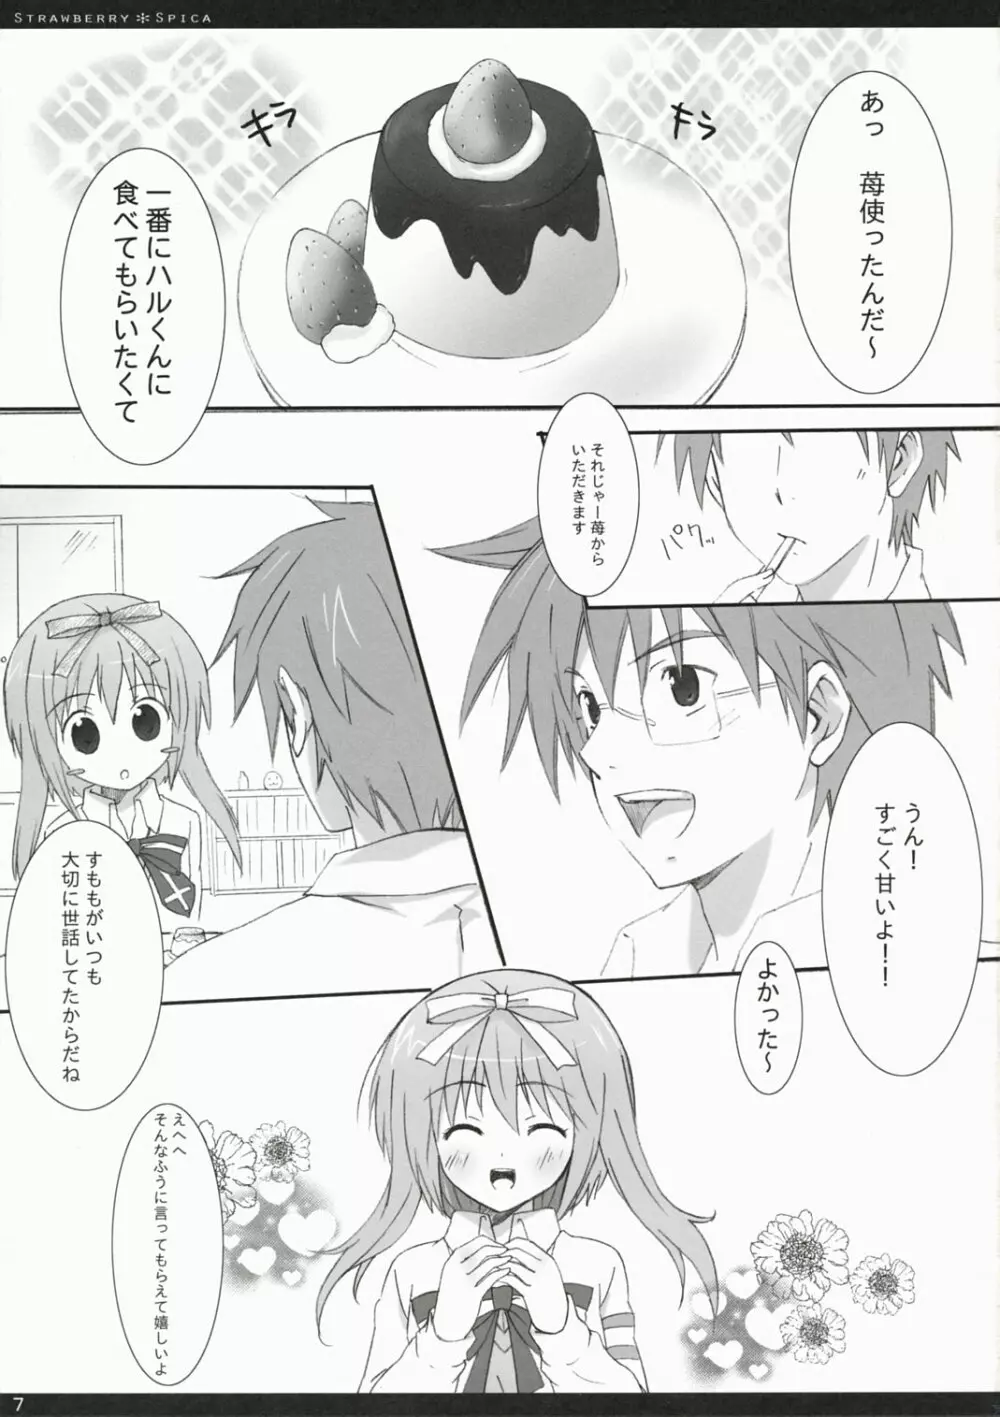 Strawberry Spica Page.6